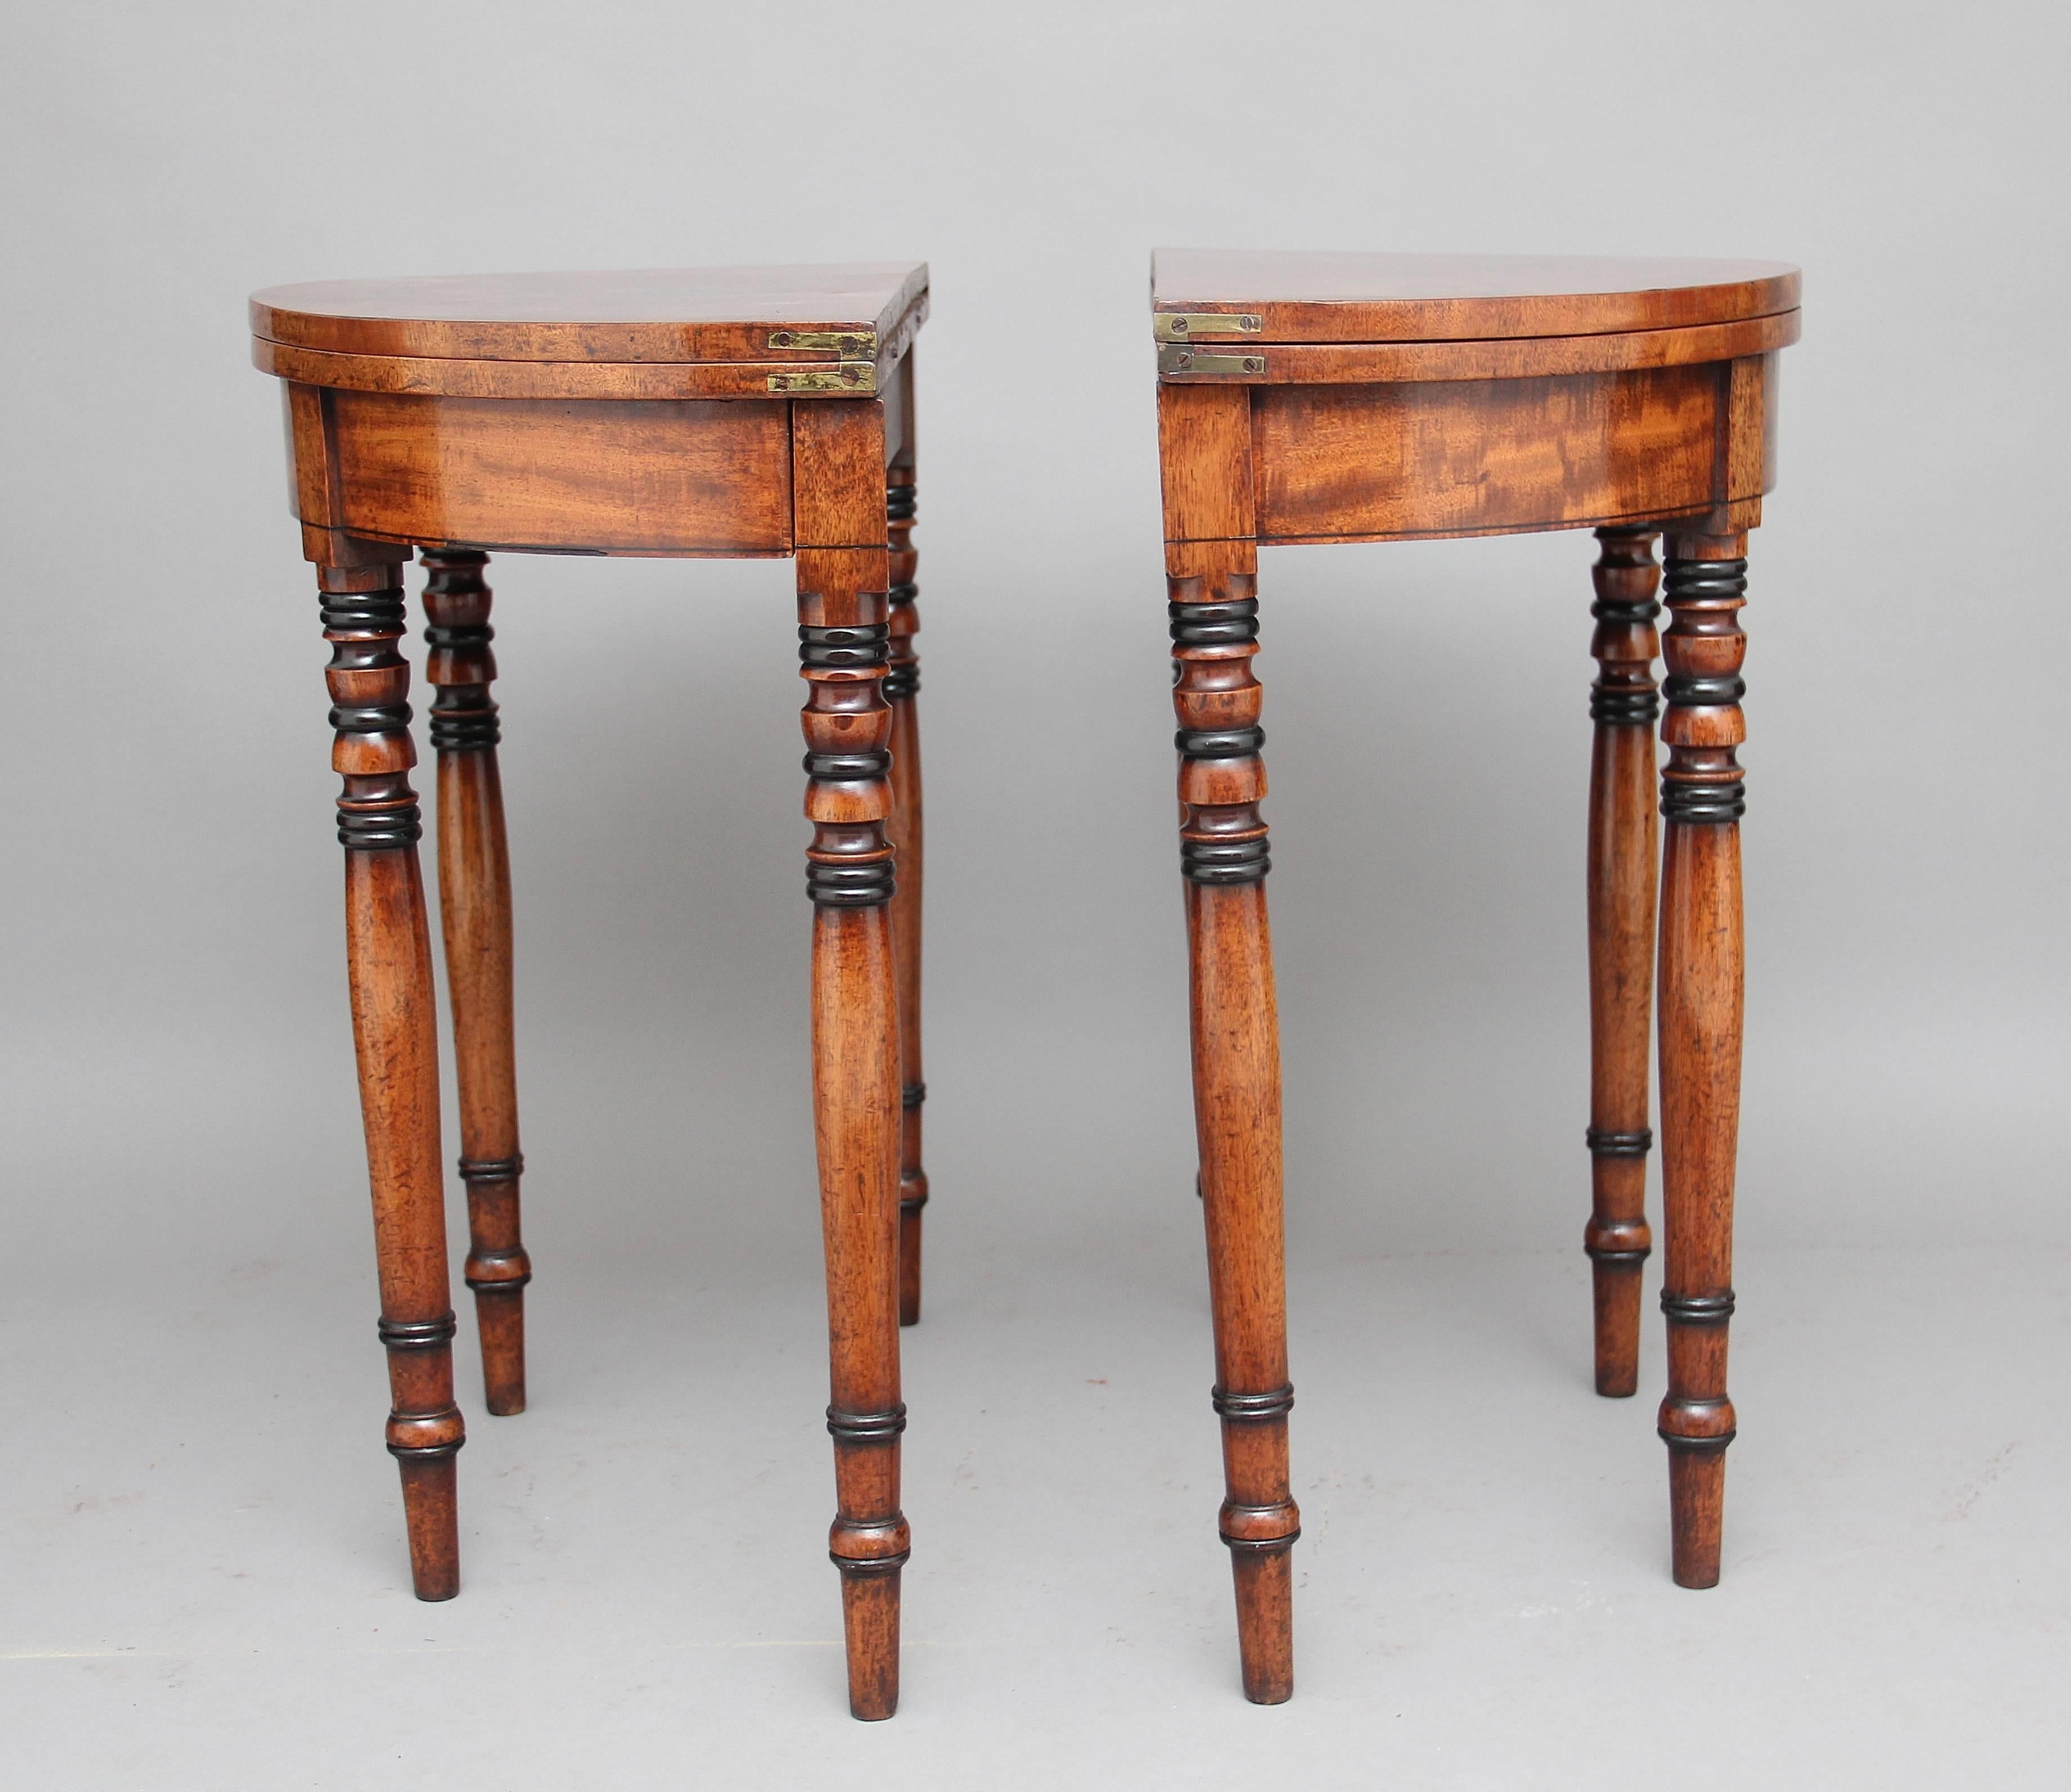 A pair of 19th century mahogany demilune card tables, the semi circular tops opening to reveal a green baize playing surface, with a frieze below supported on nicely turned legs which are partly ebonised, circa 1840.
 